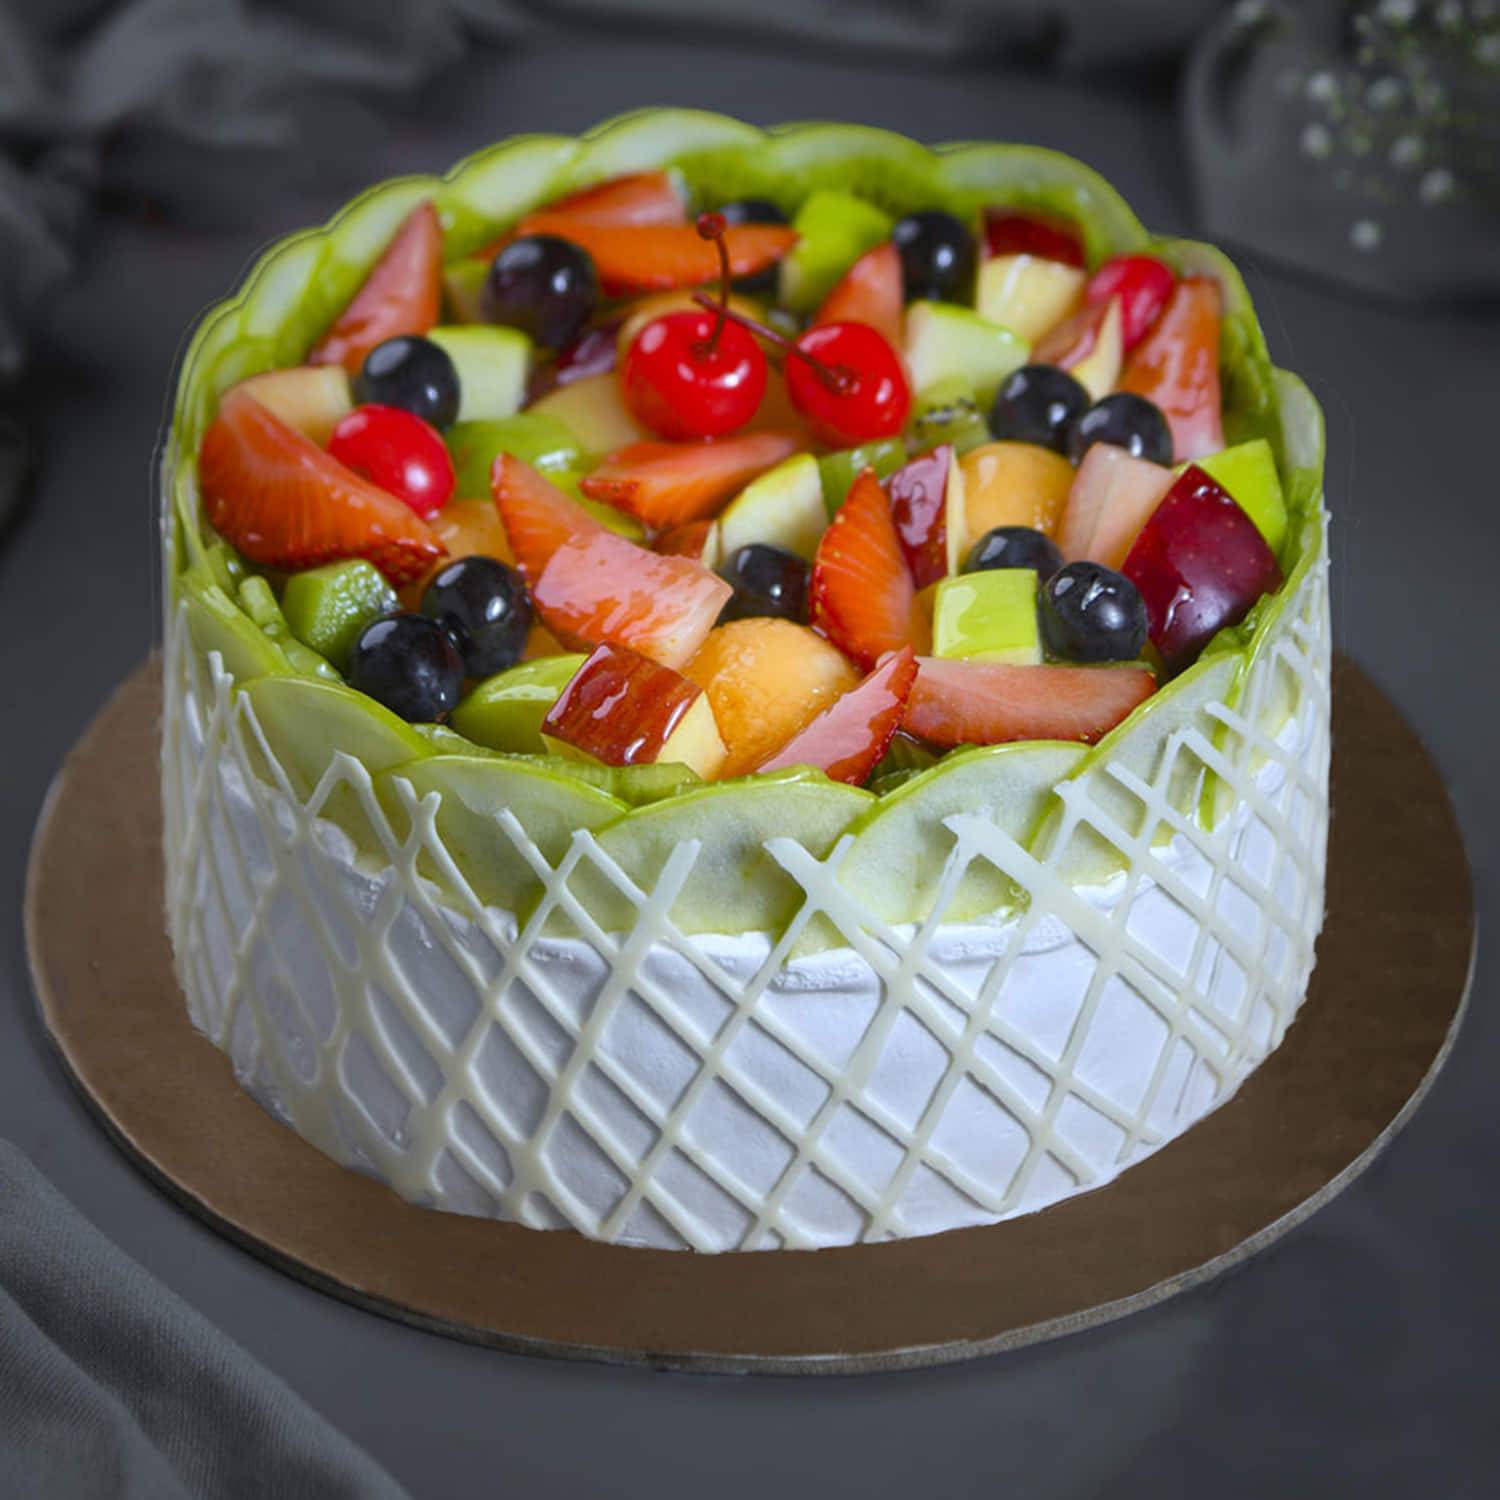 Gourmet Couch by ITC Hotels - Life's more vibrant with our Fresh Fruit  Gateau. Our all time favourite light, fluffy vanilla sponge cake is layered  with fruits and cream. This summary delight,